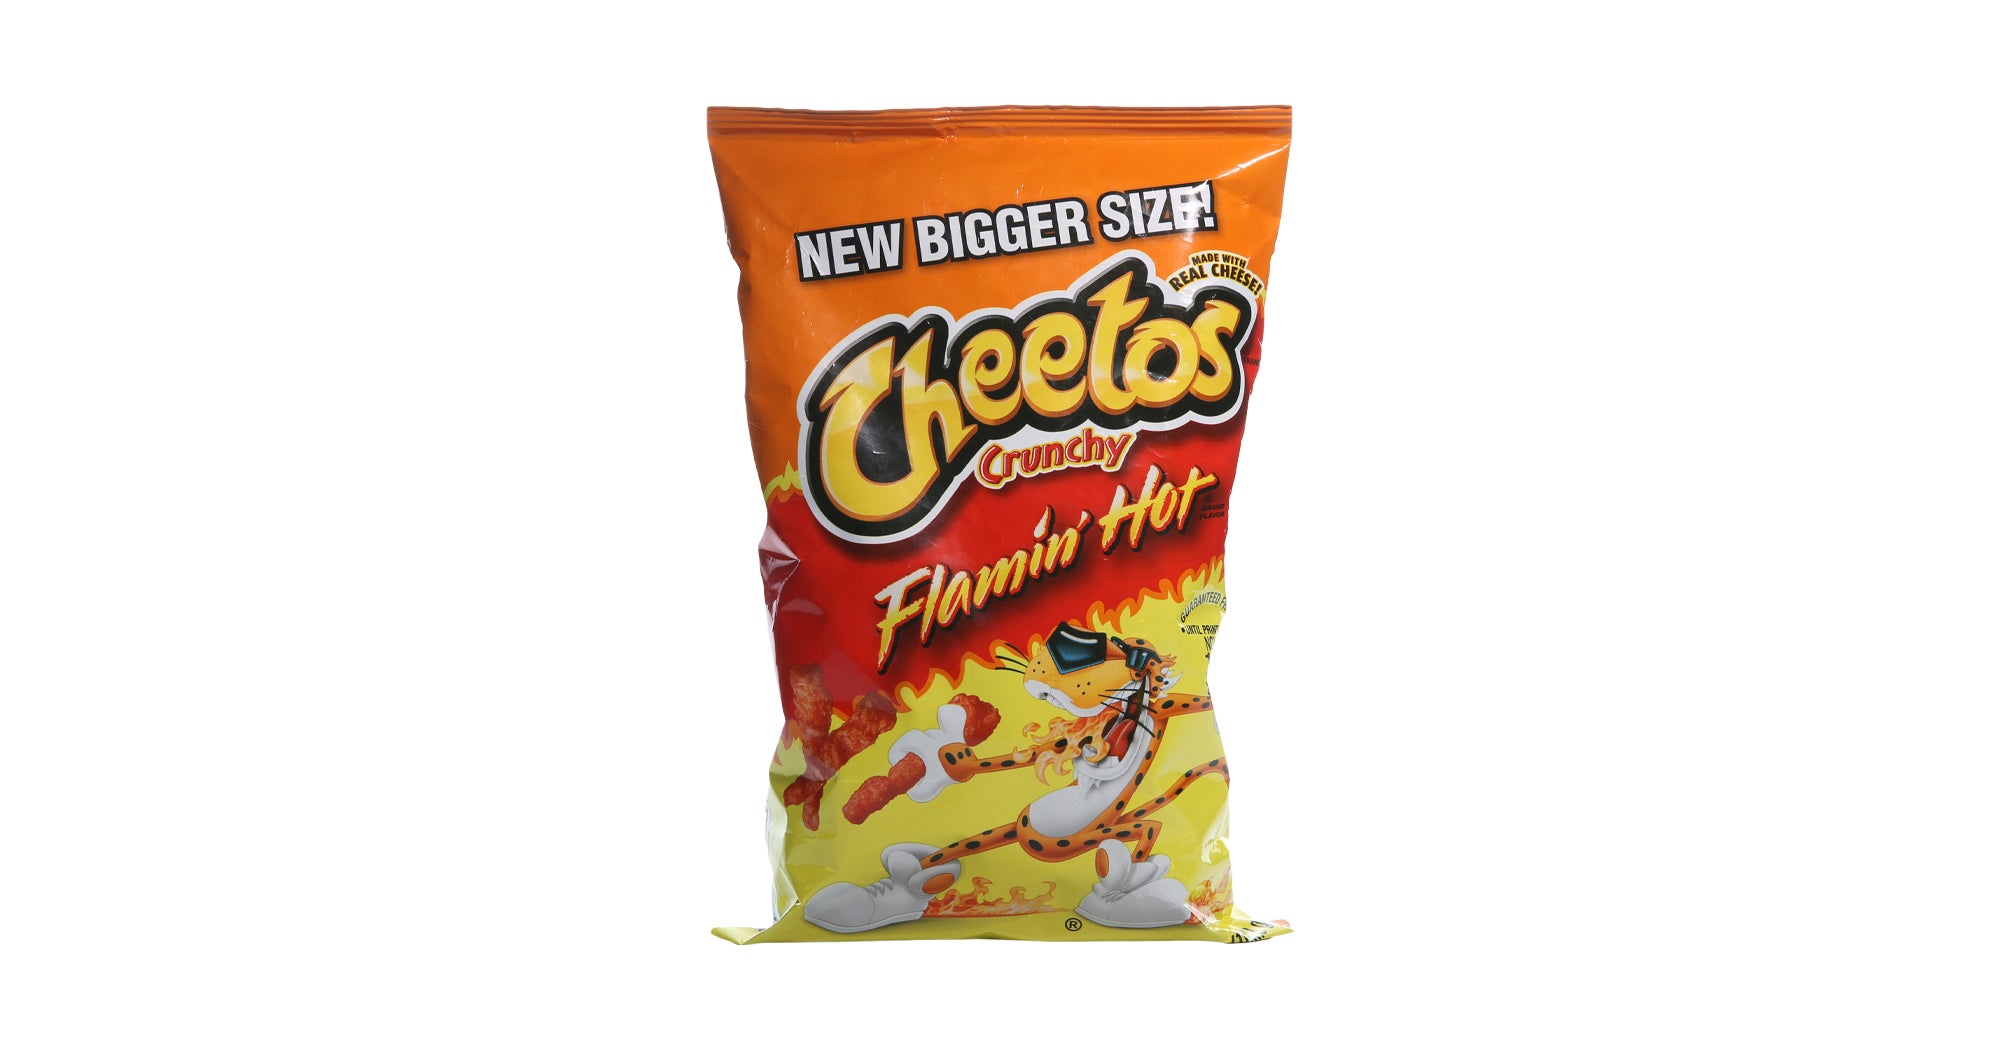 Is The Flamin' Hot Cheetos Origin Story Based On a Lie?